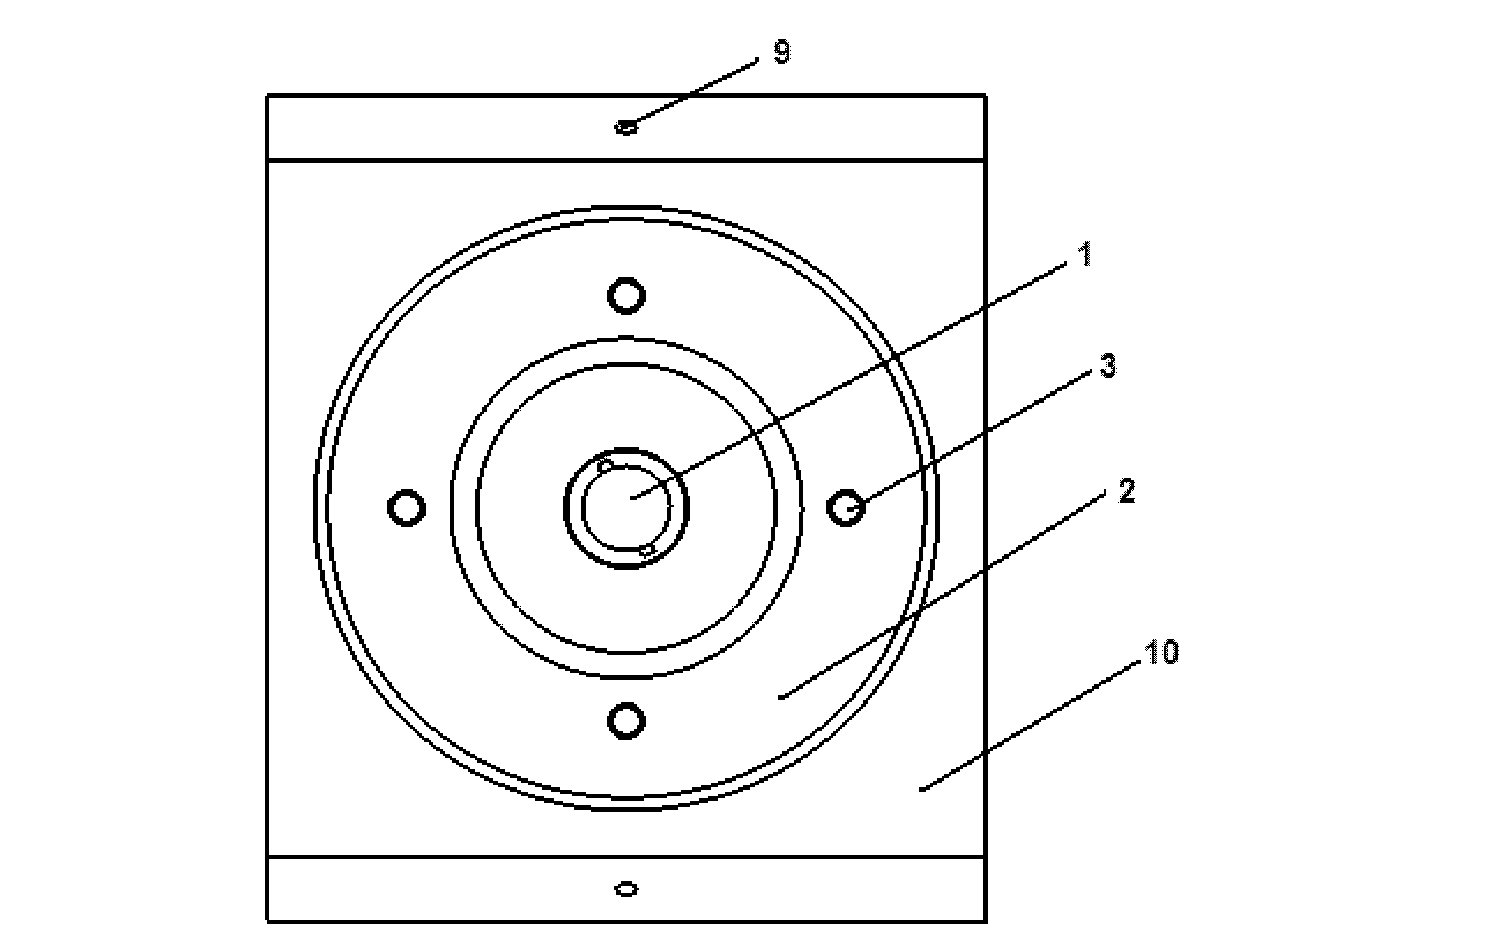 Atomizing jet device for cleaning